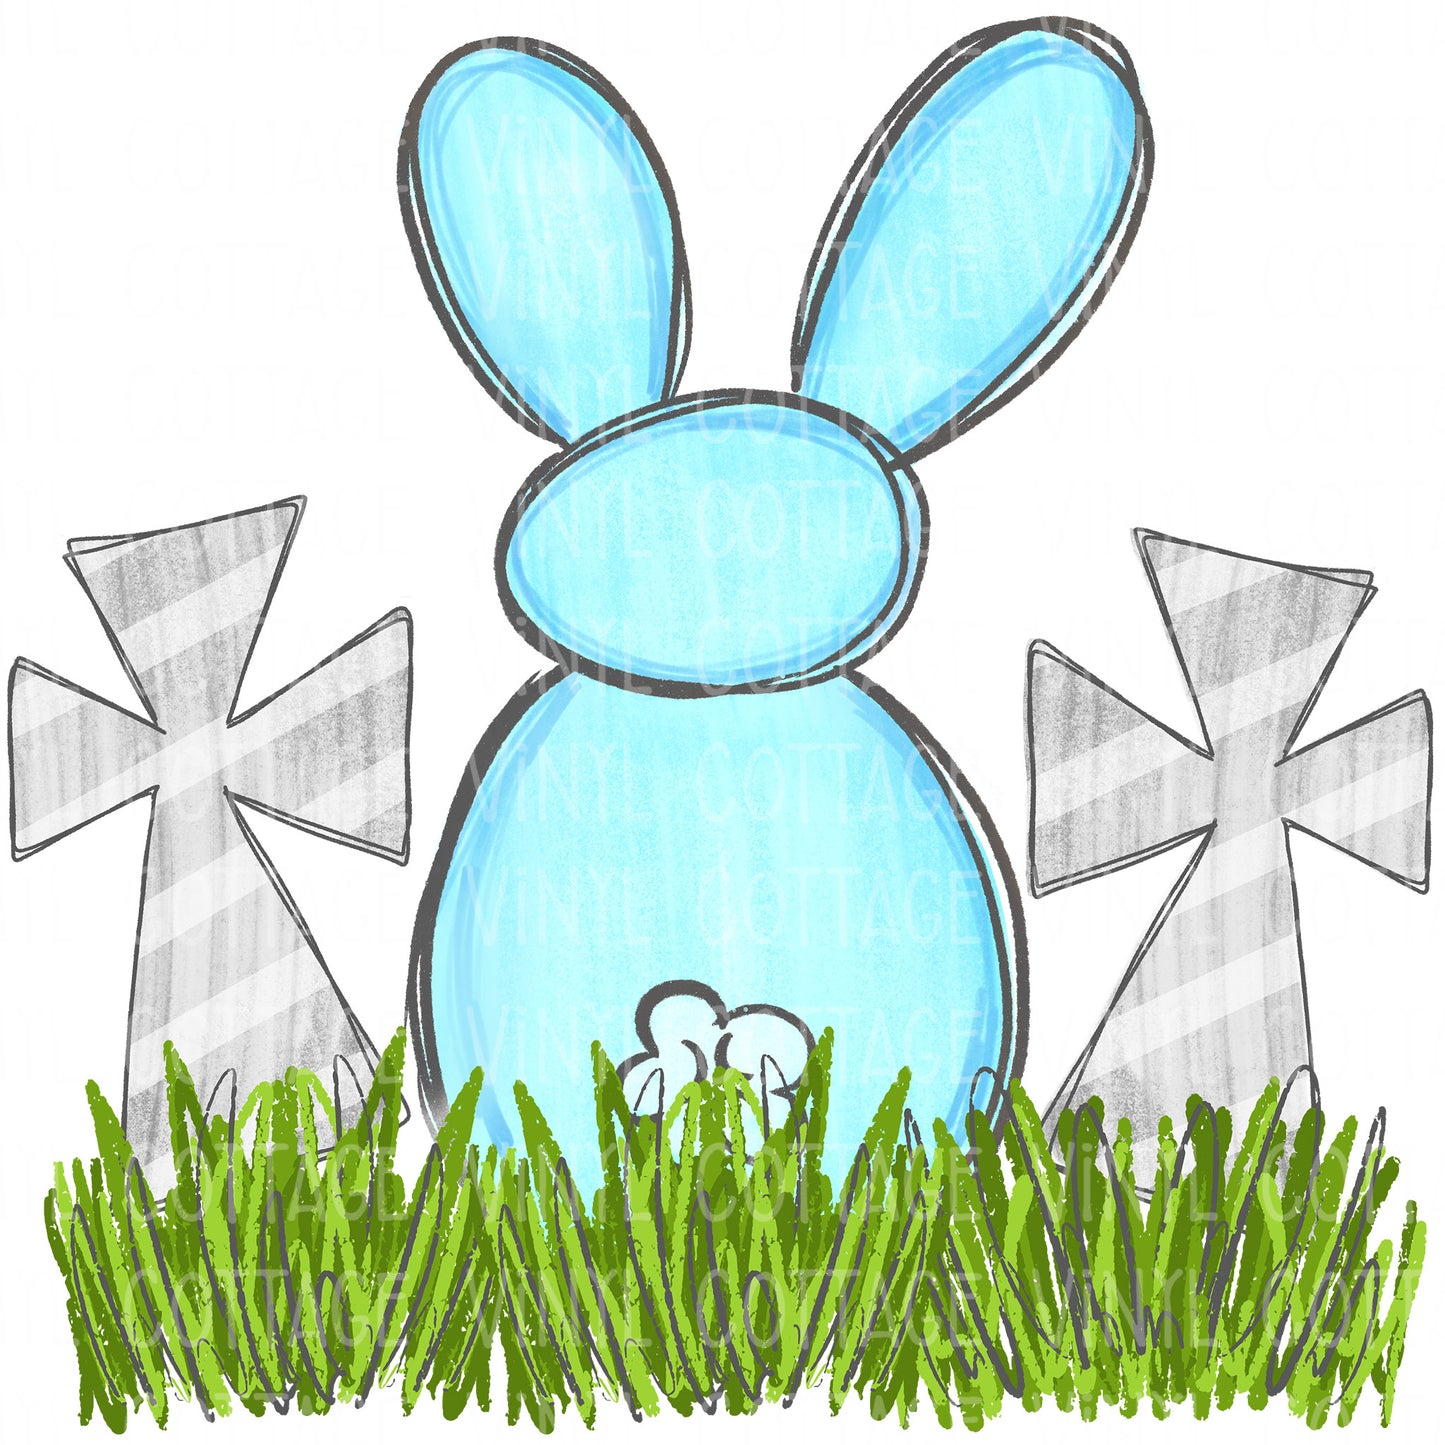 TR628 Blue Bunny in Grass with Crosses